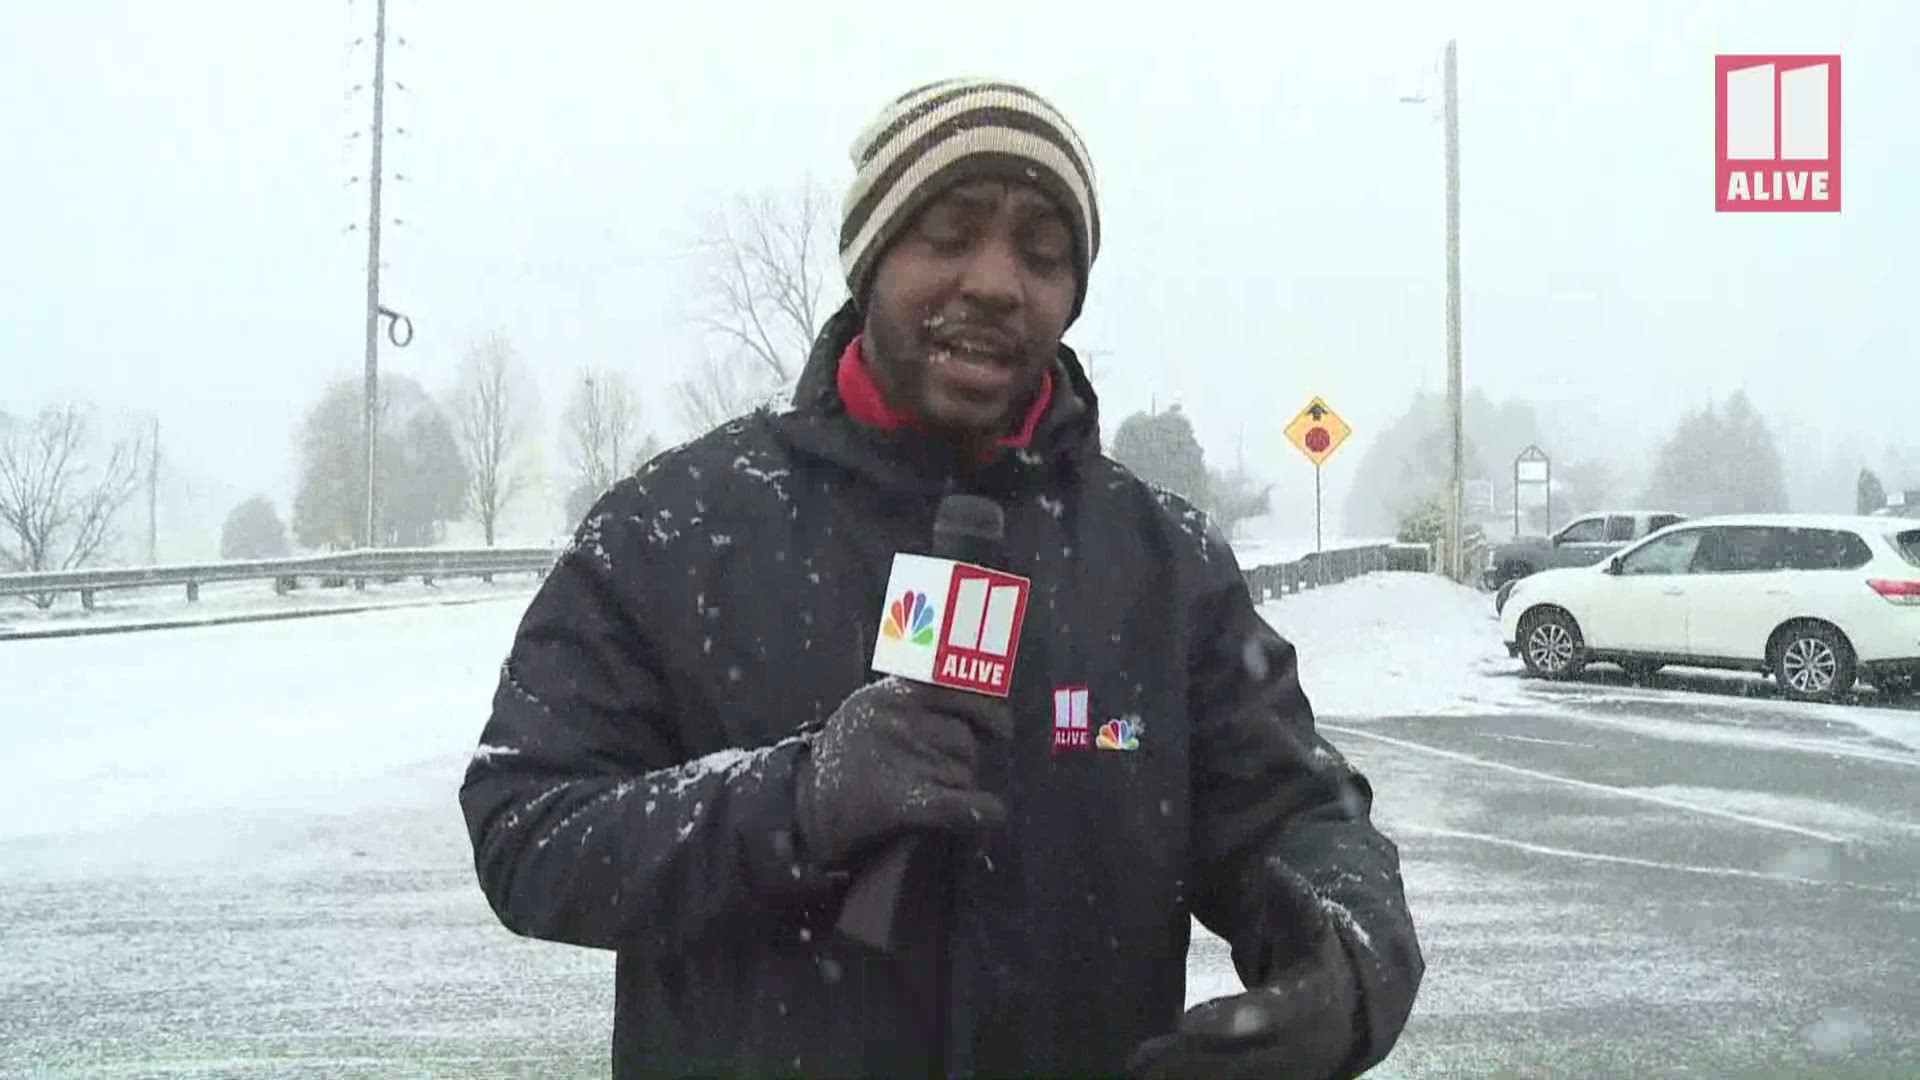 11Alive's Nick Sturidvant reports from Blairsville on the amazing snowfall we're seeing in Georgia today!